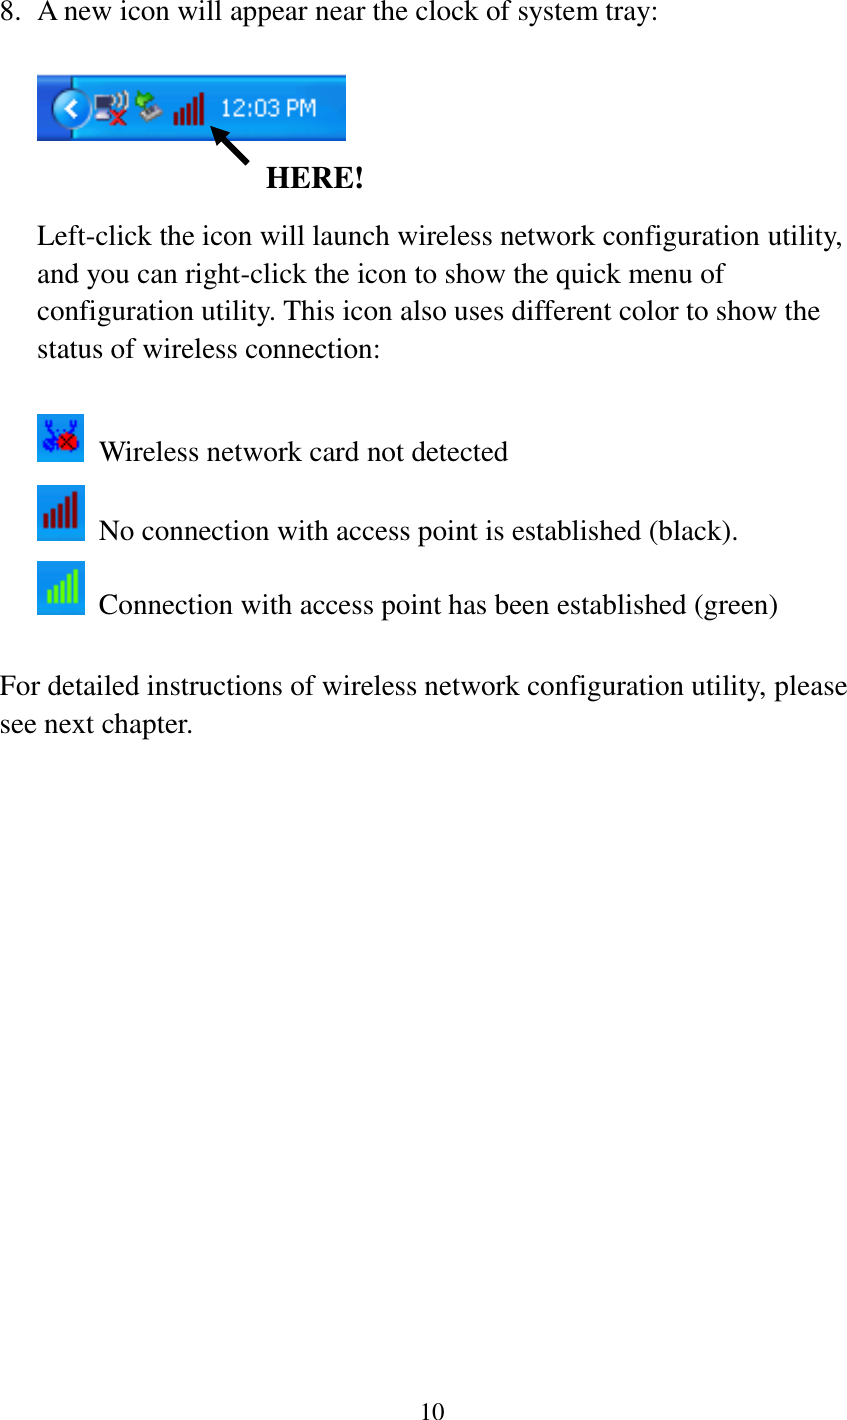 10   8. A new icon will appear near the clock of system tray:    Left-click the icon will launch wireless network configuration utility, and you can right-click the icon to show the quick menu of configuration utility. This icon also uses different color to show the status of wireless connection:    Wireless network card not detected   No connection with access point is established (black).   Connection with access point has been established (green)  For detailed instructions of wireless network configuration utility, please see next chapter.                HERE! 